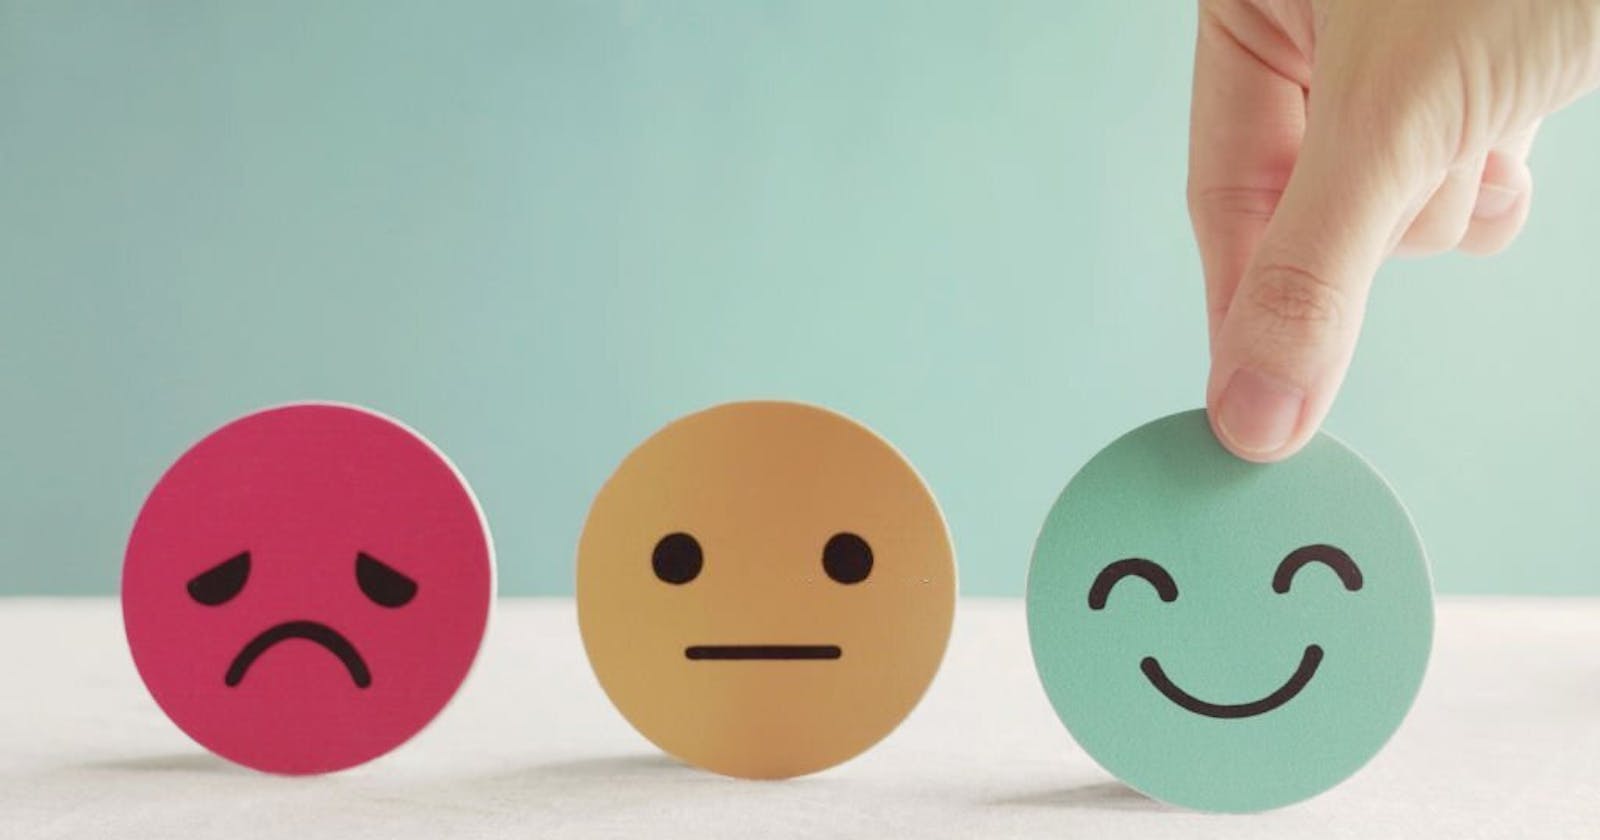 How sentiment analysis can help you understand your customers better